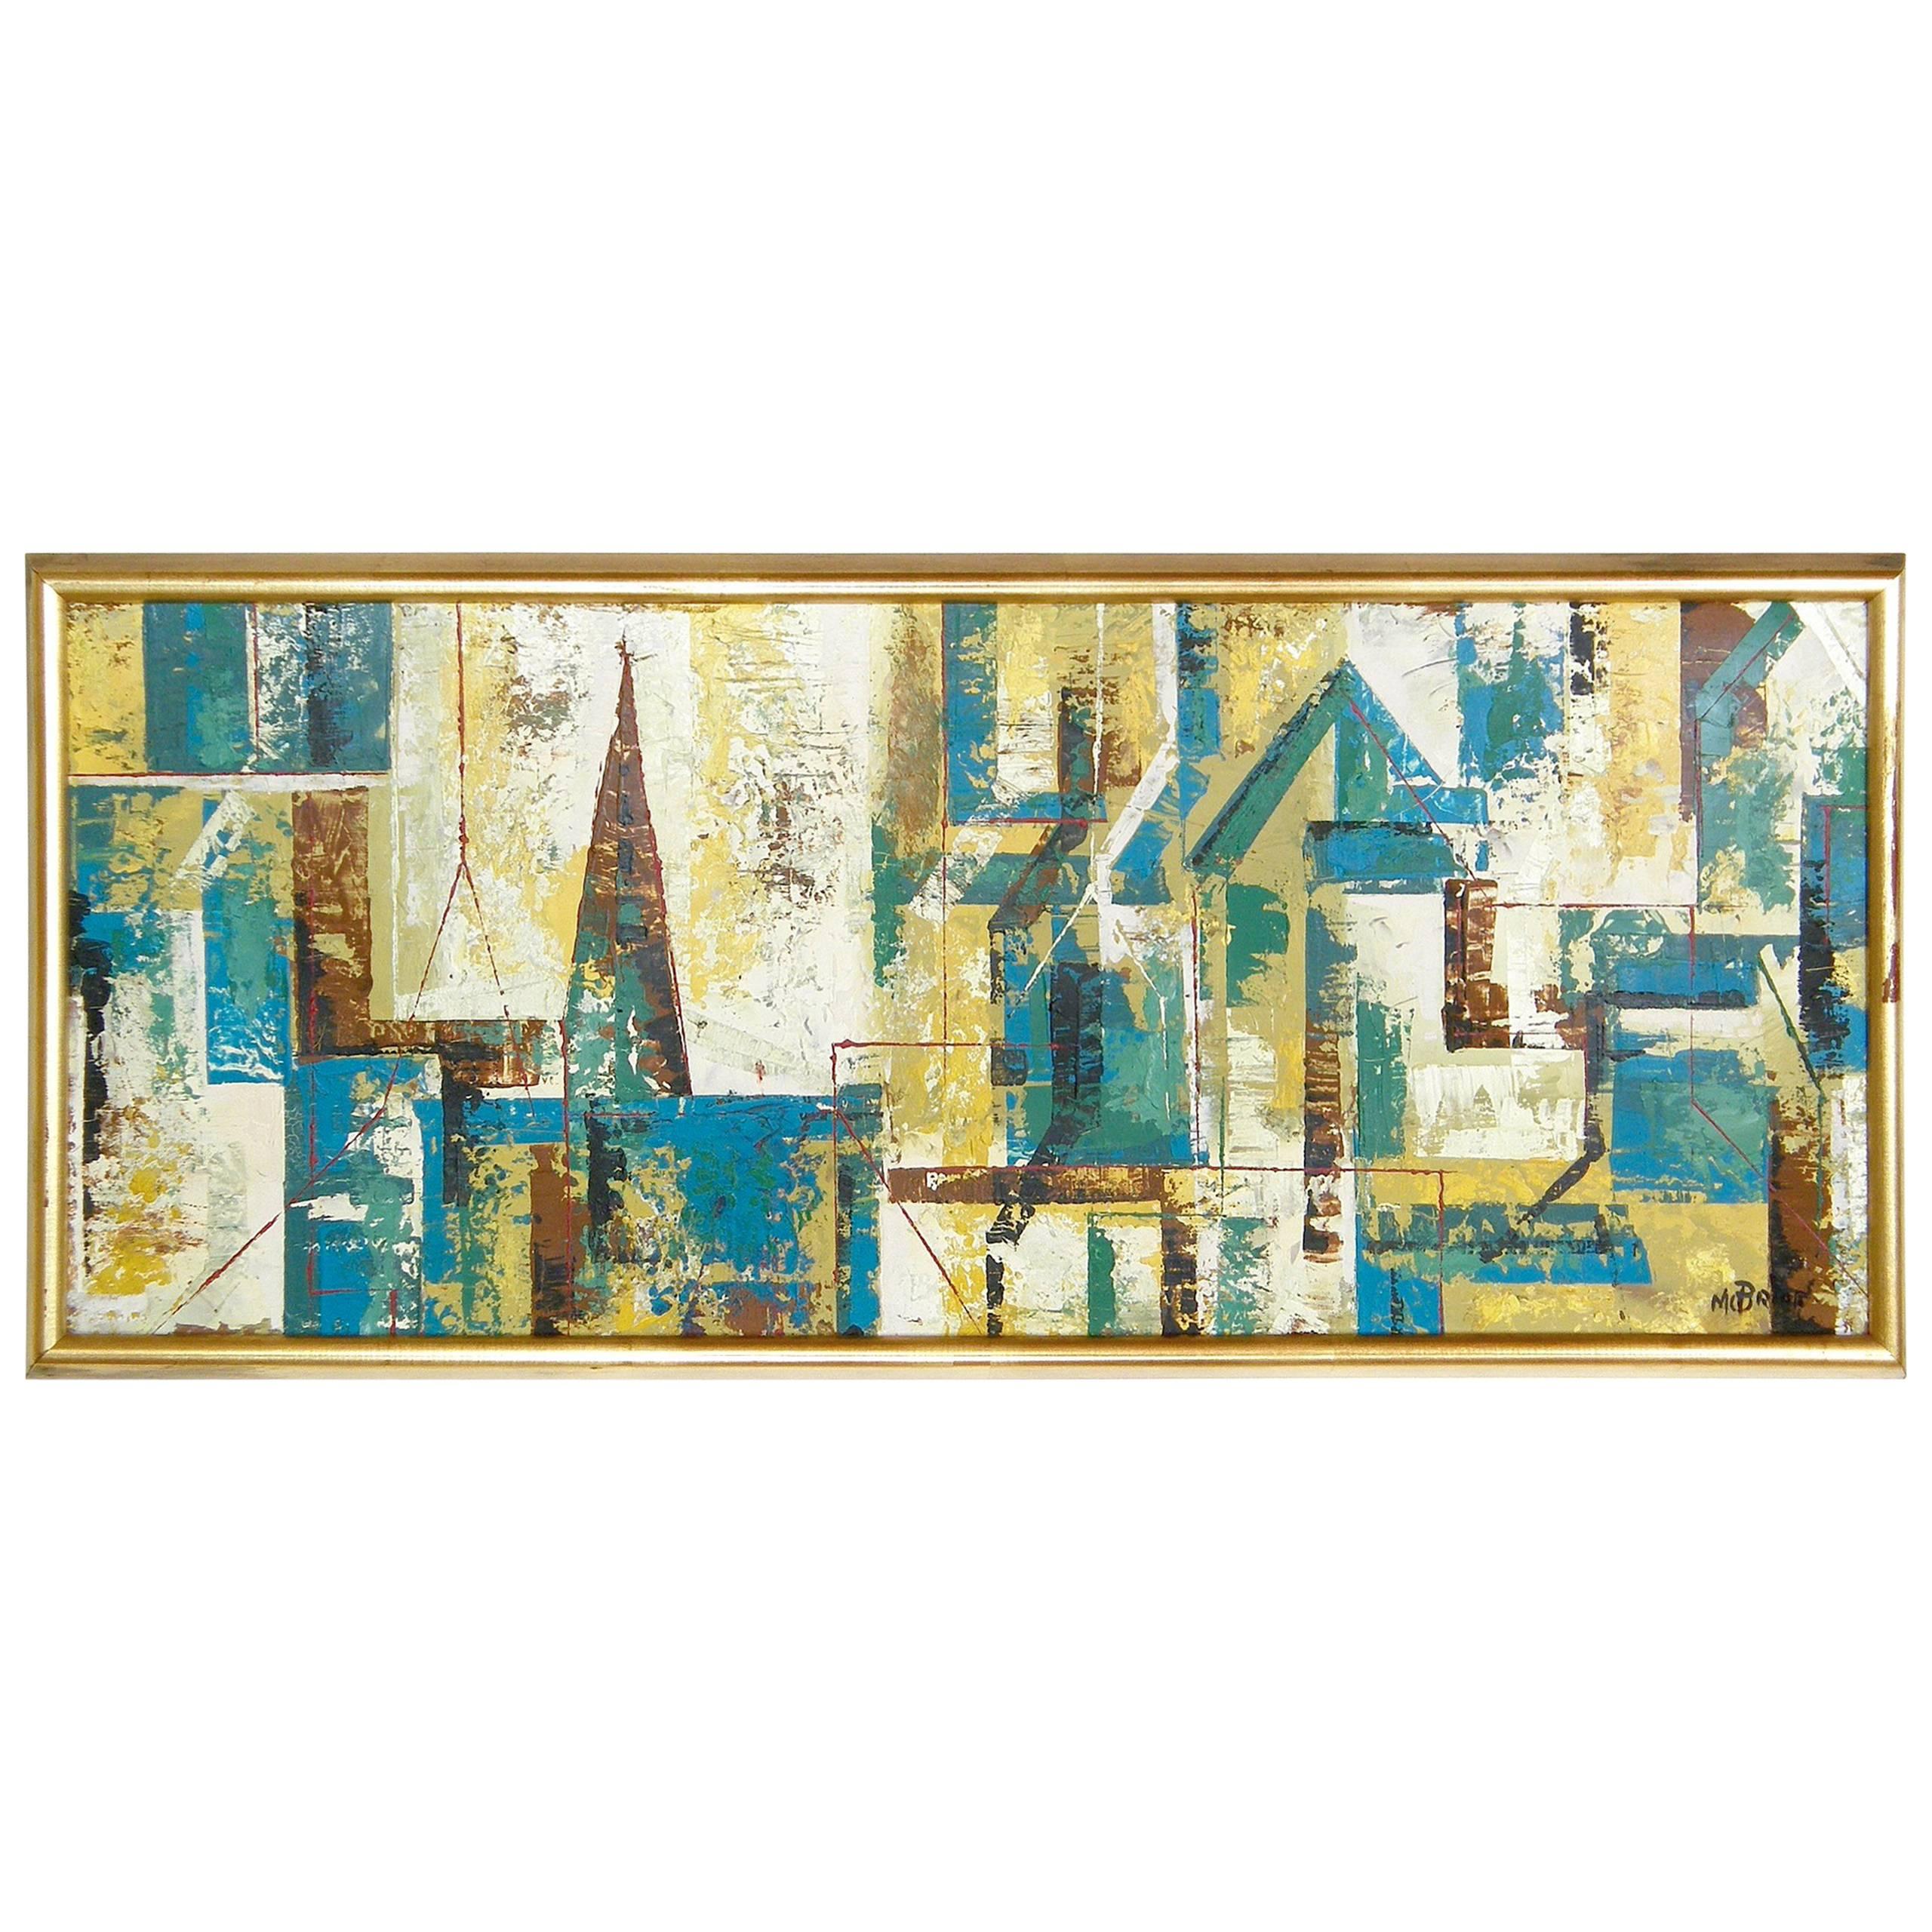 Abstract Cityscape Painting on Board by Chicago Artist William McBride, Jr.